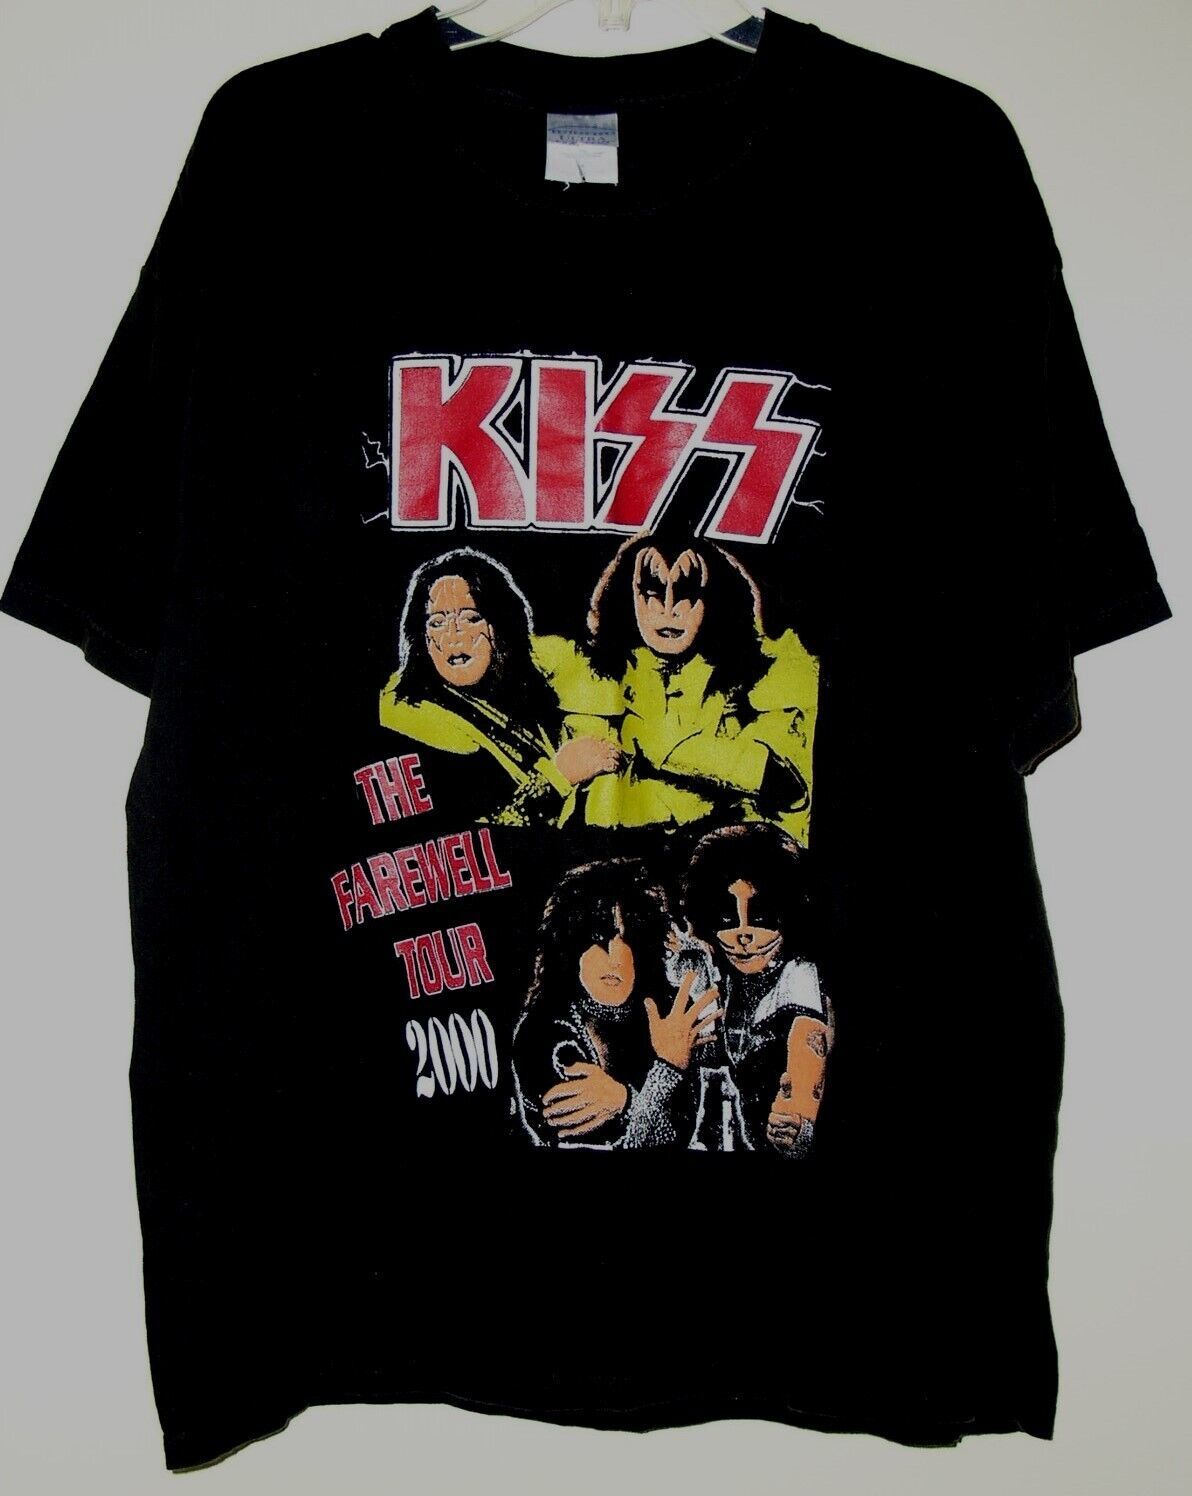 Primary image for Kiss Farewell Tour Concert T Shirt Vintage 2000 Ted Nugent Skid Row Size Large